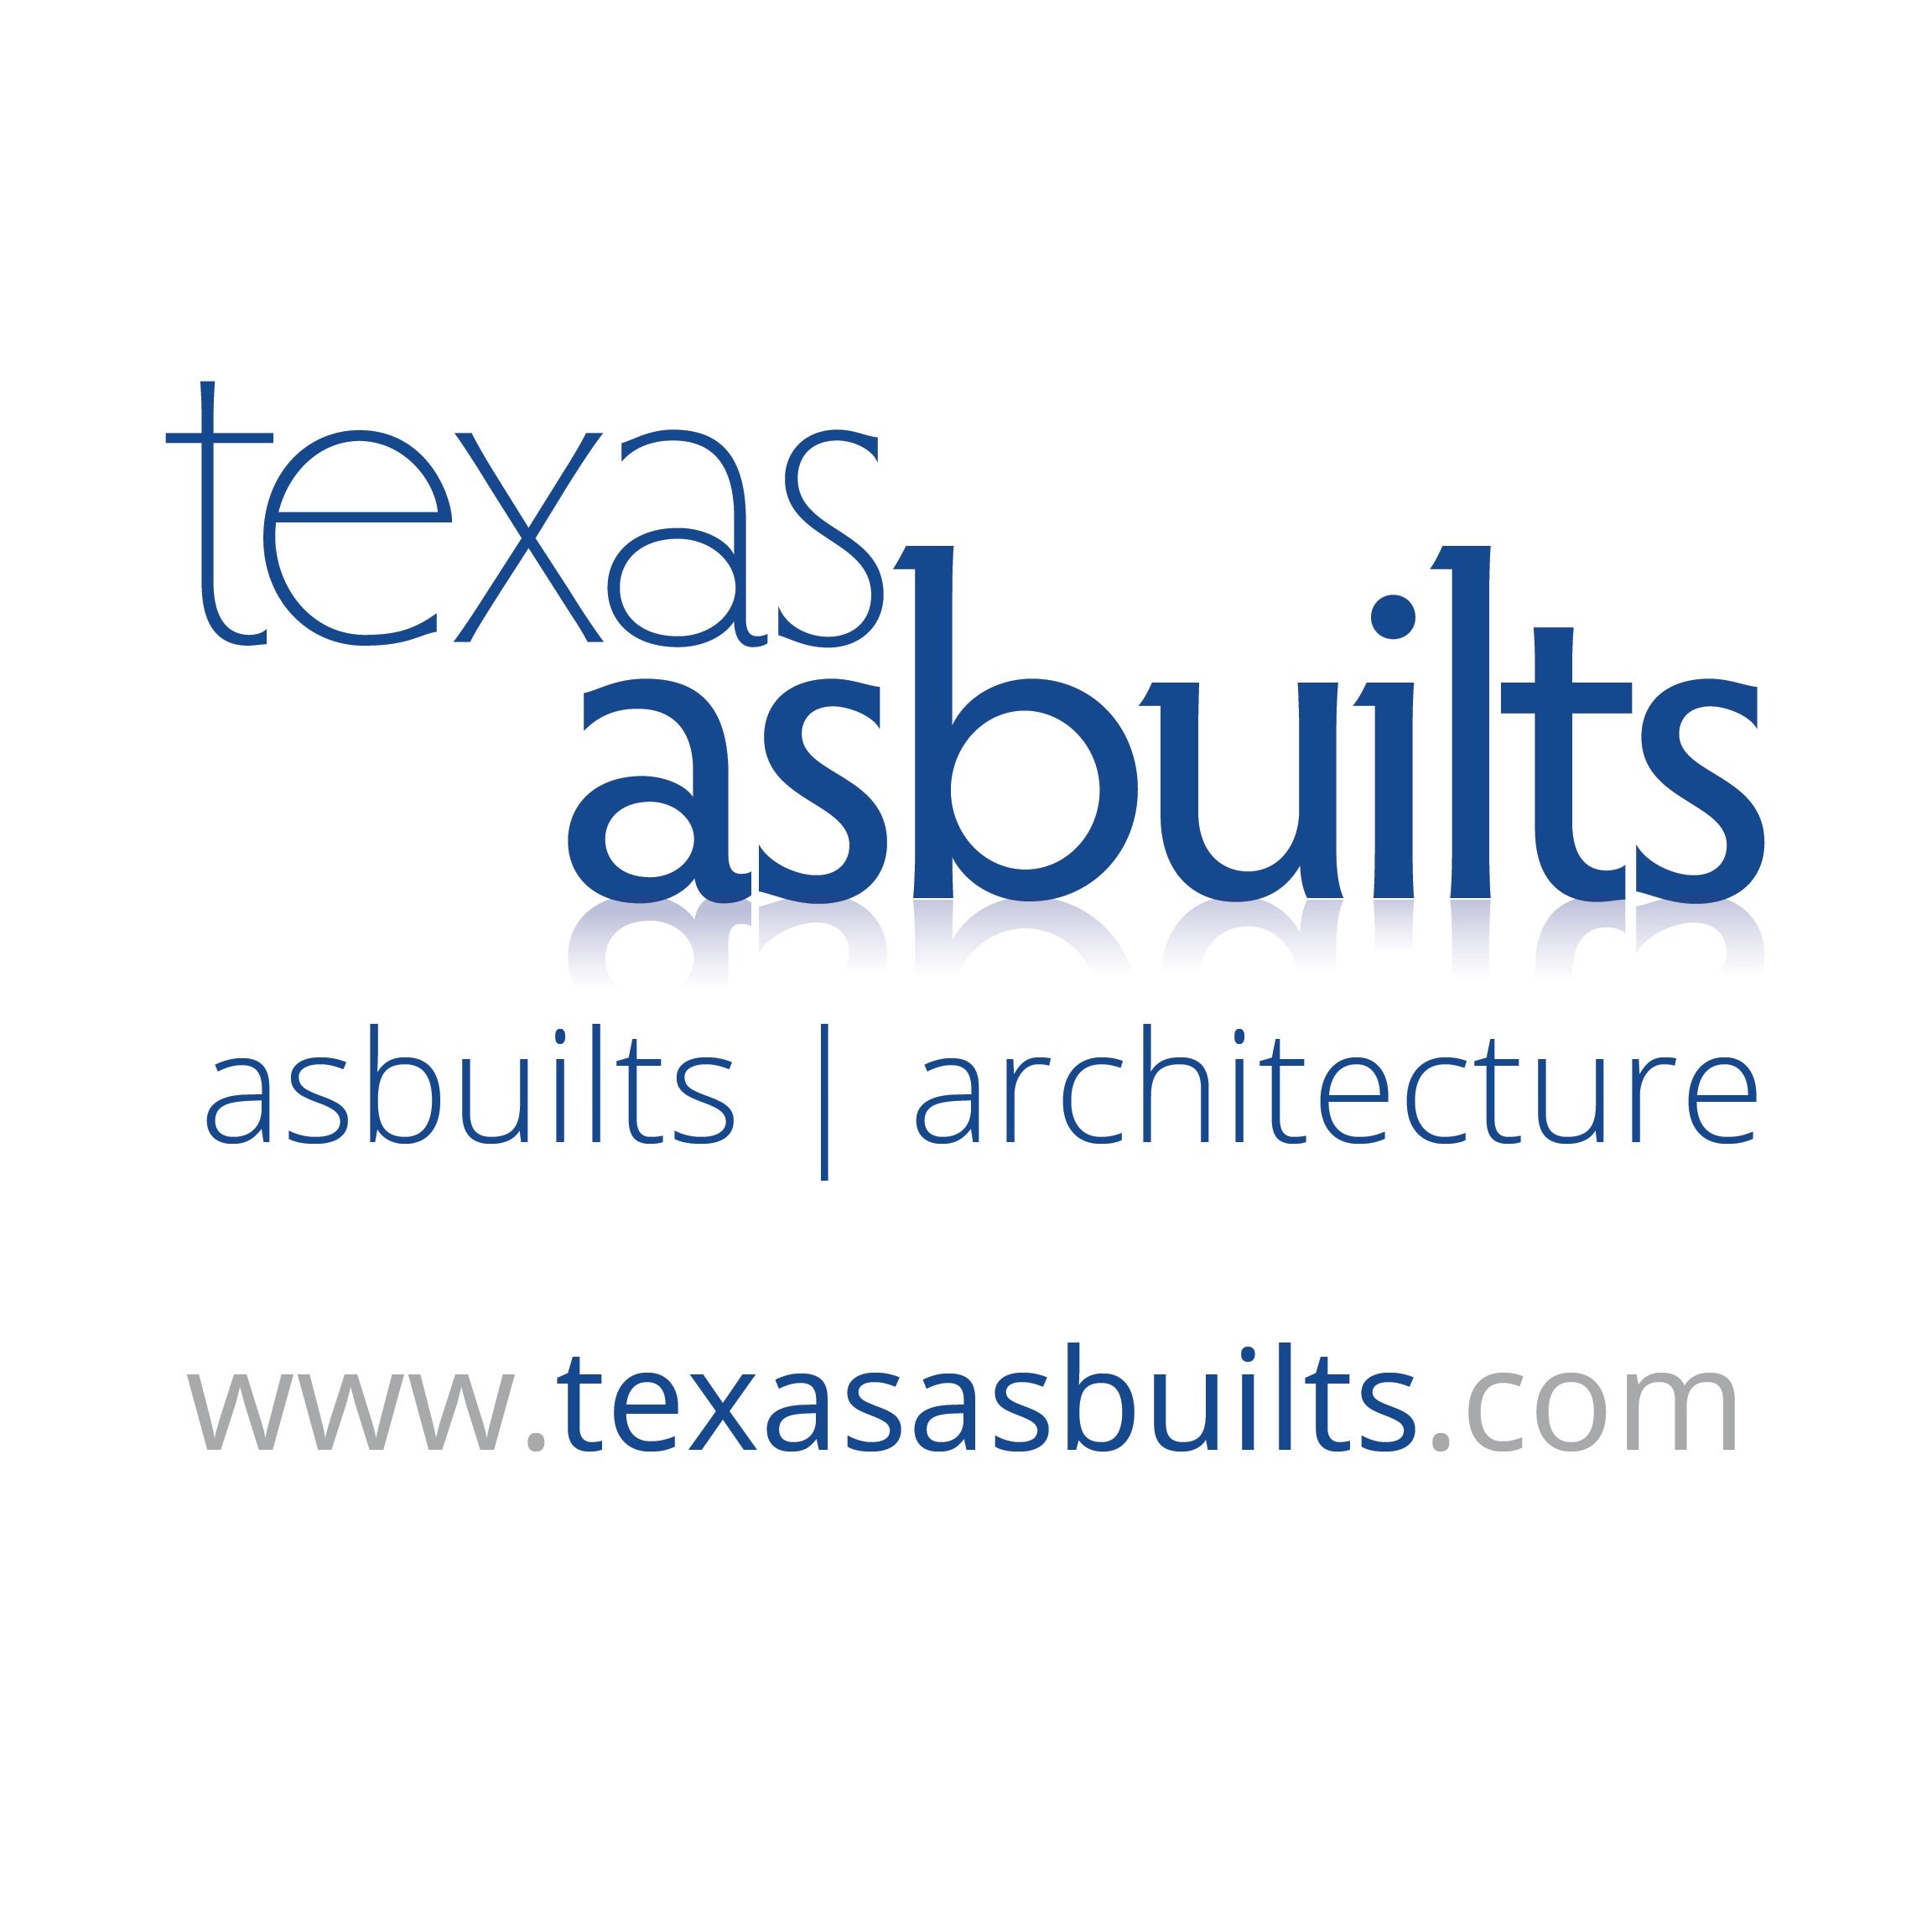 Texas Asbuilts is a full service architecture studio that offers asbuilt documentation of existing buildings.